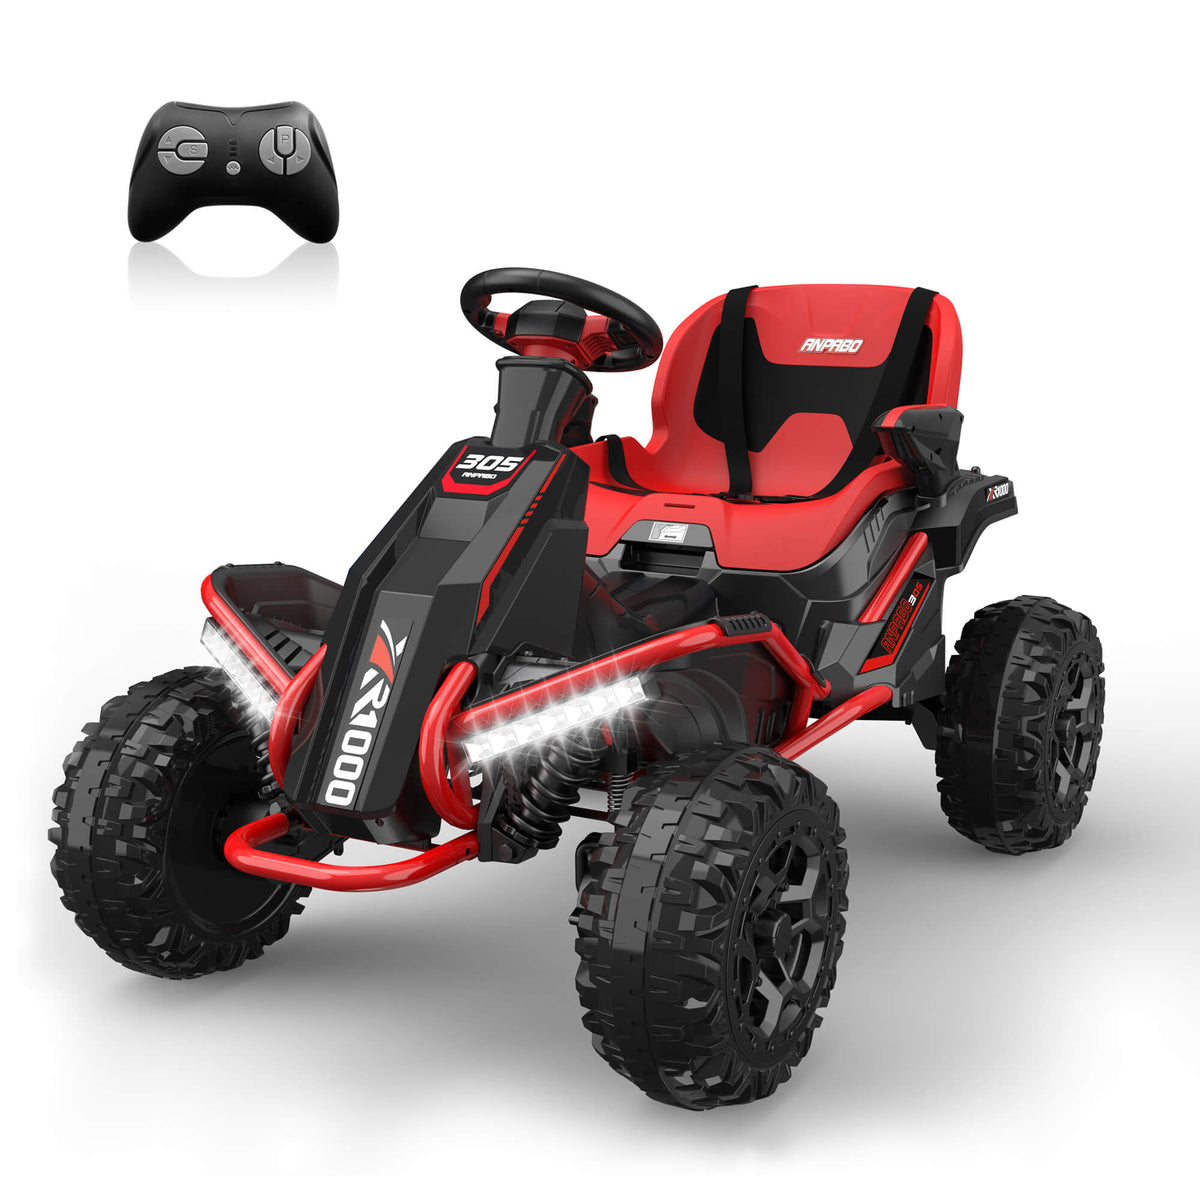 24V 4WD/2WD Switchable Ride on ATV-Red